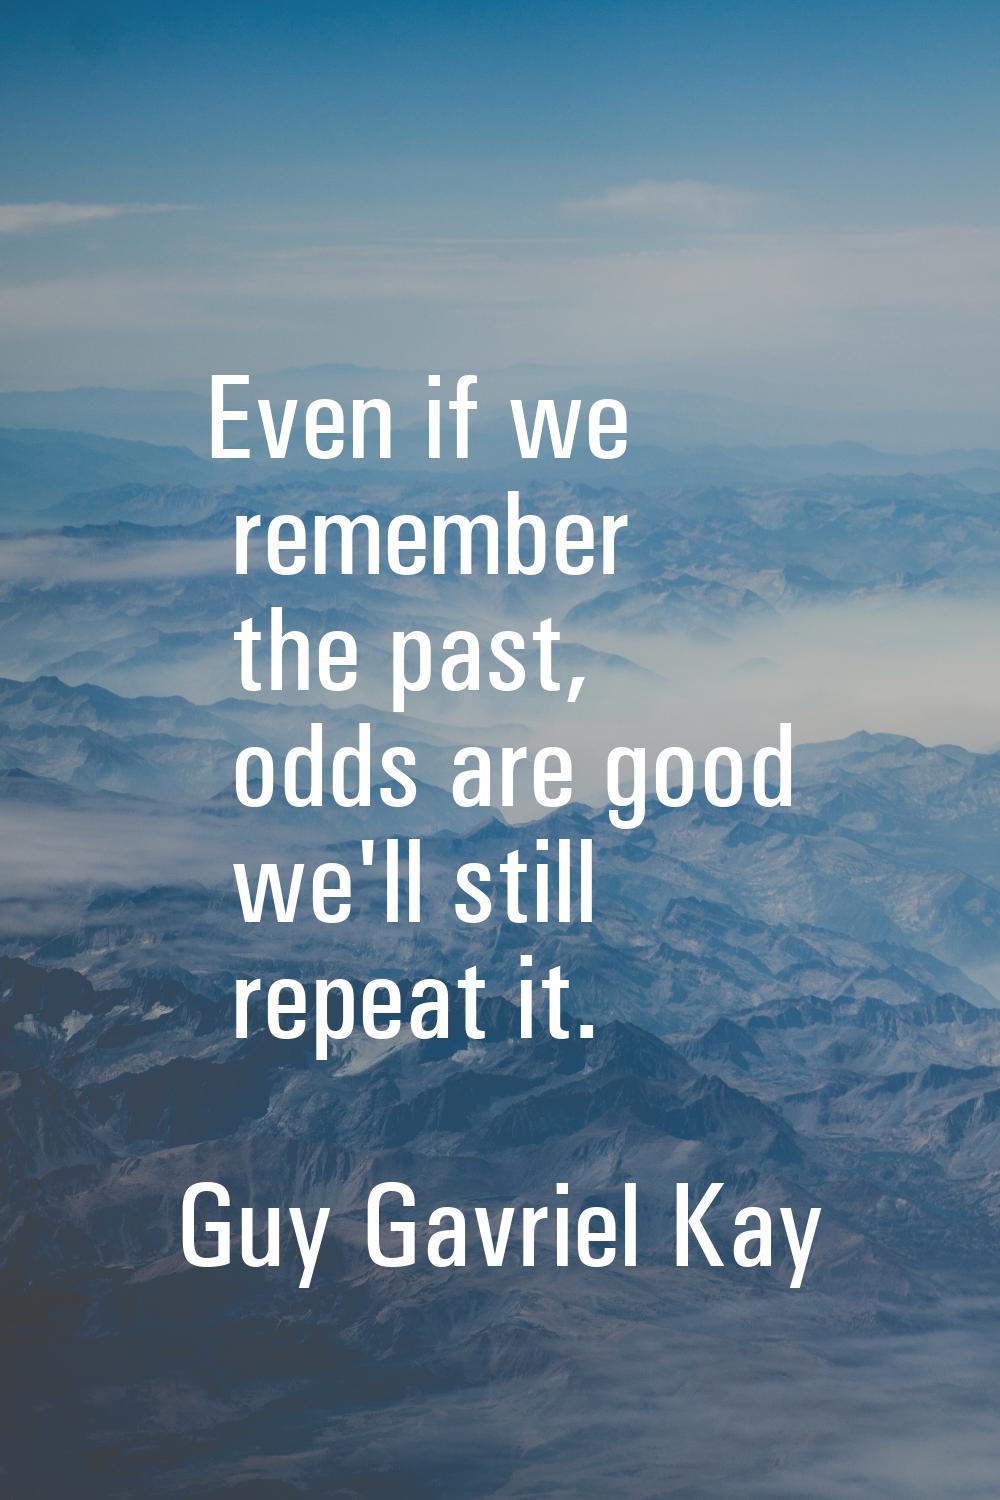 Even if we remember the past, odds are good we'll still repeat it.